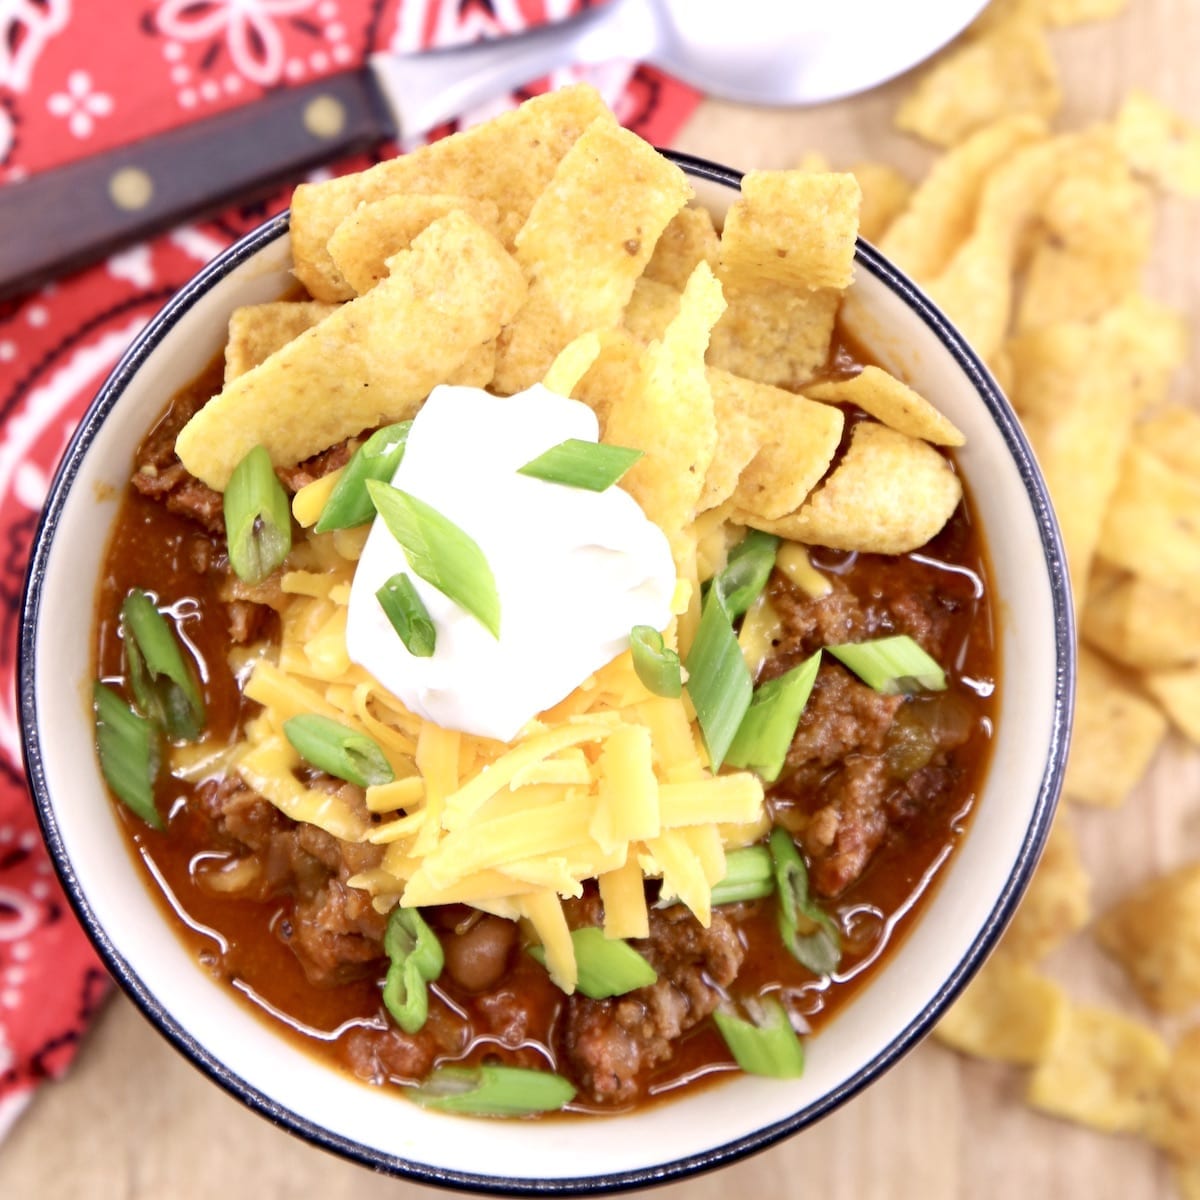 Smoked chili in a bowl with cheese, sour cream, Fritos and green onions